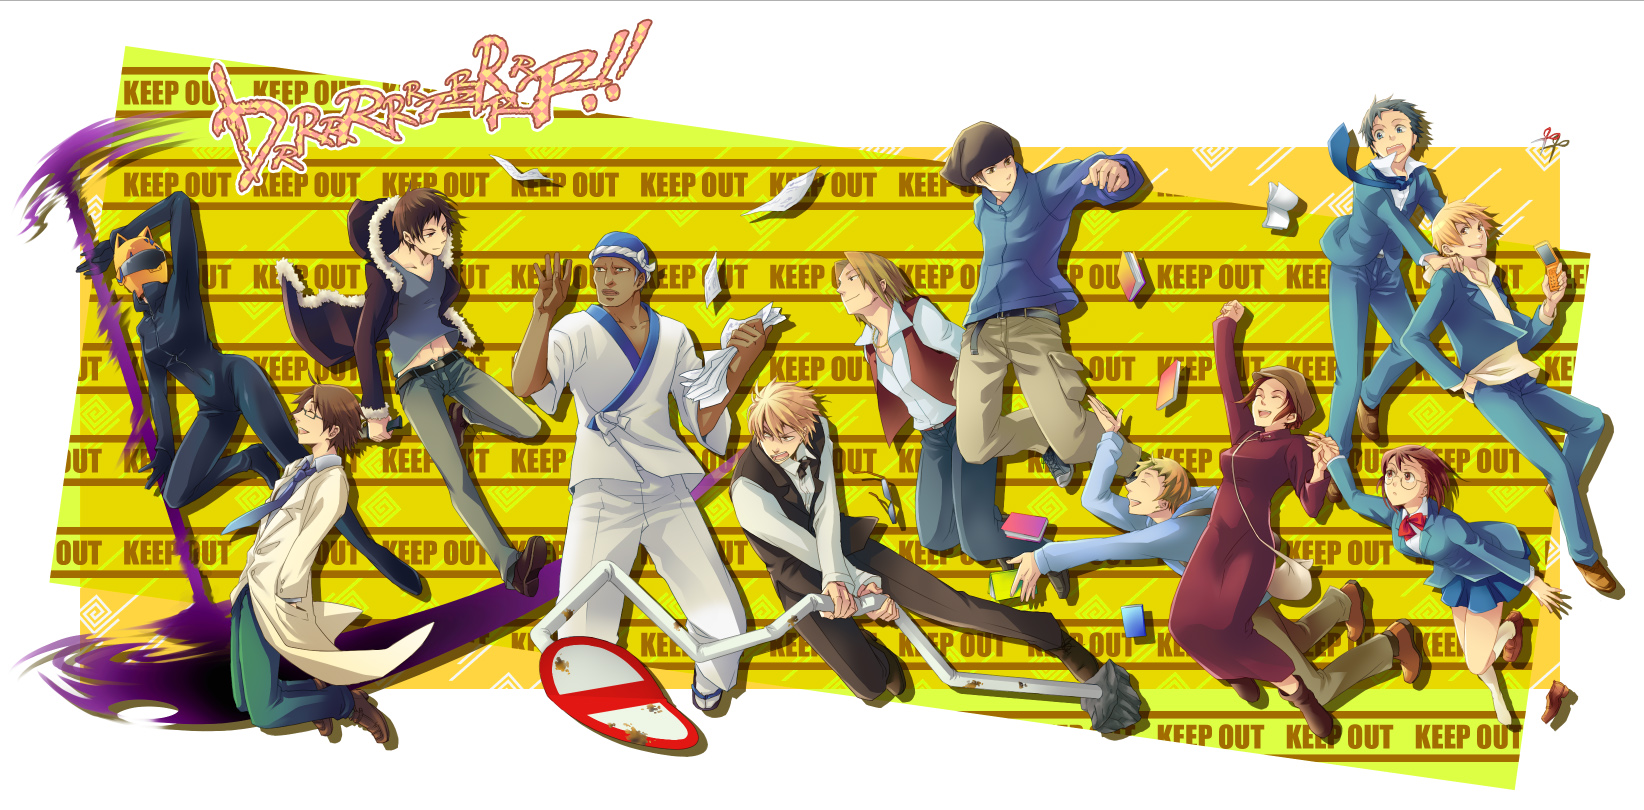 Durarara!! anime characters in a group shot, showcasing a captivating desktop wallpaper. Perfect for fans!